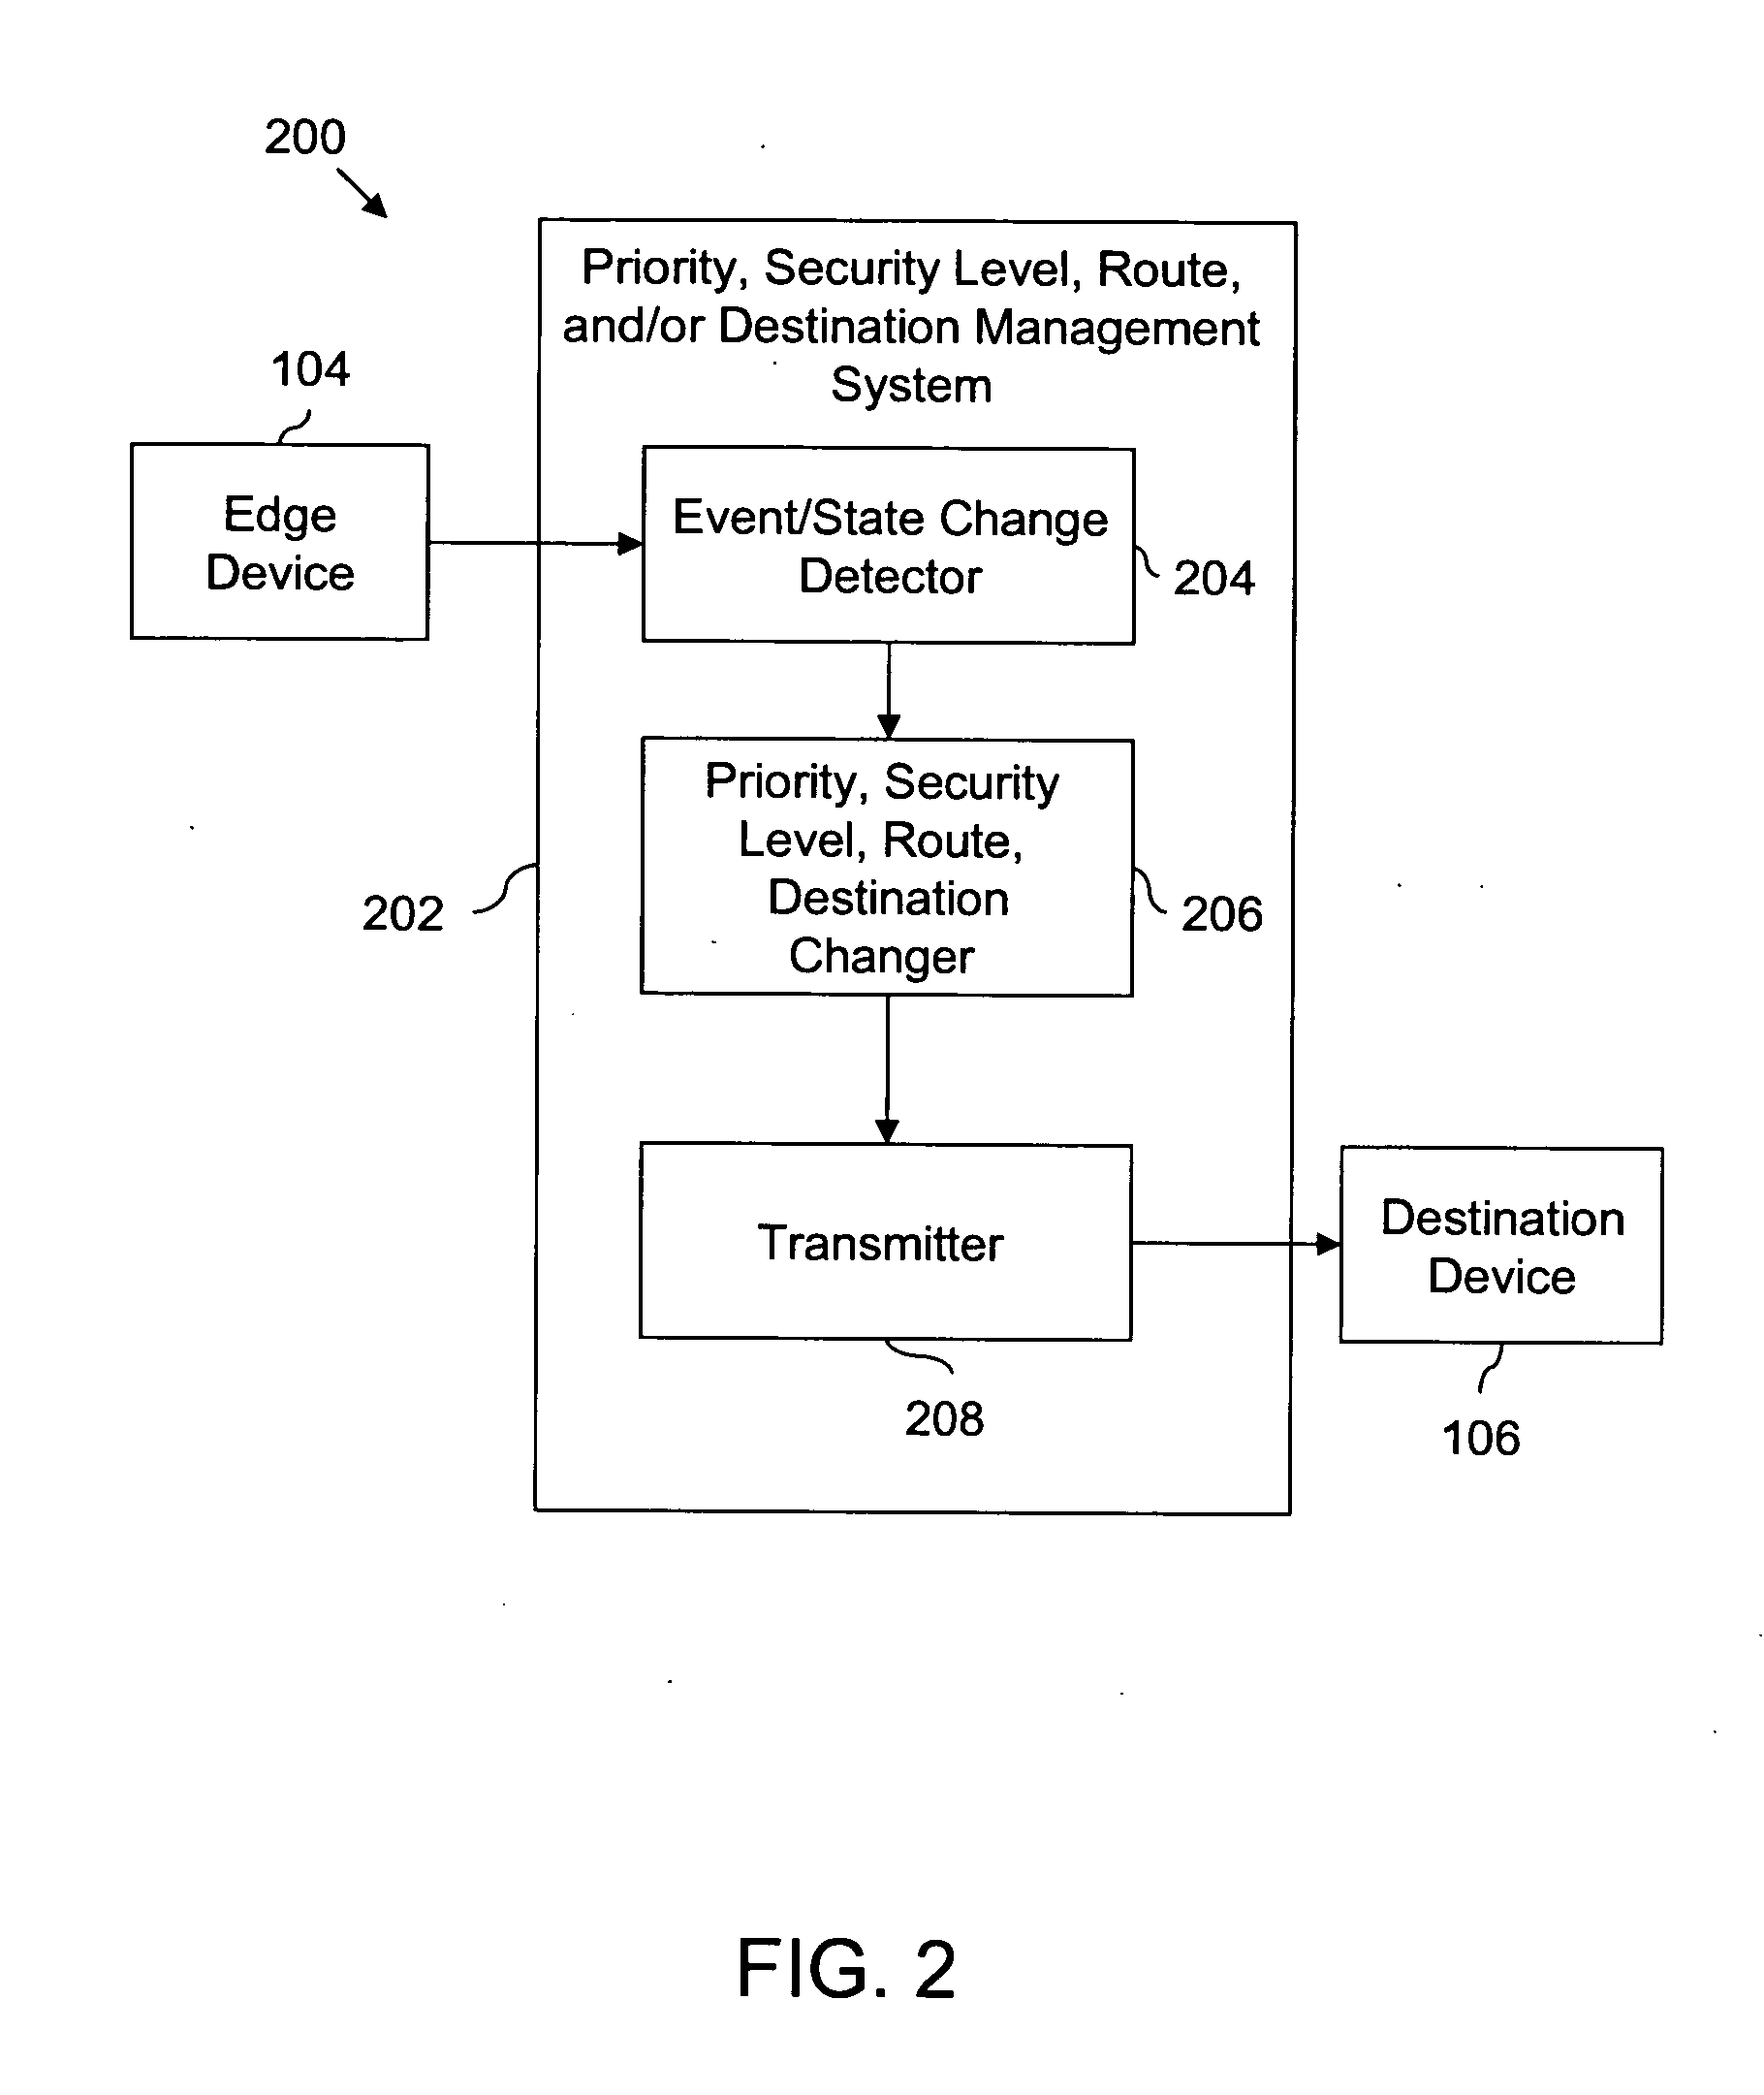 Method and system for transmitting data over a network based on external non-network stimulus